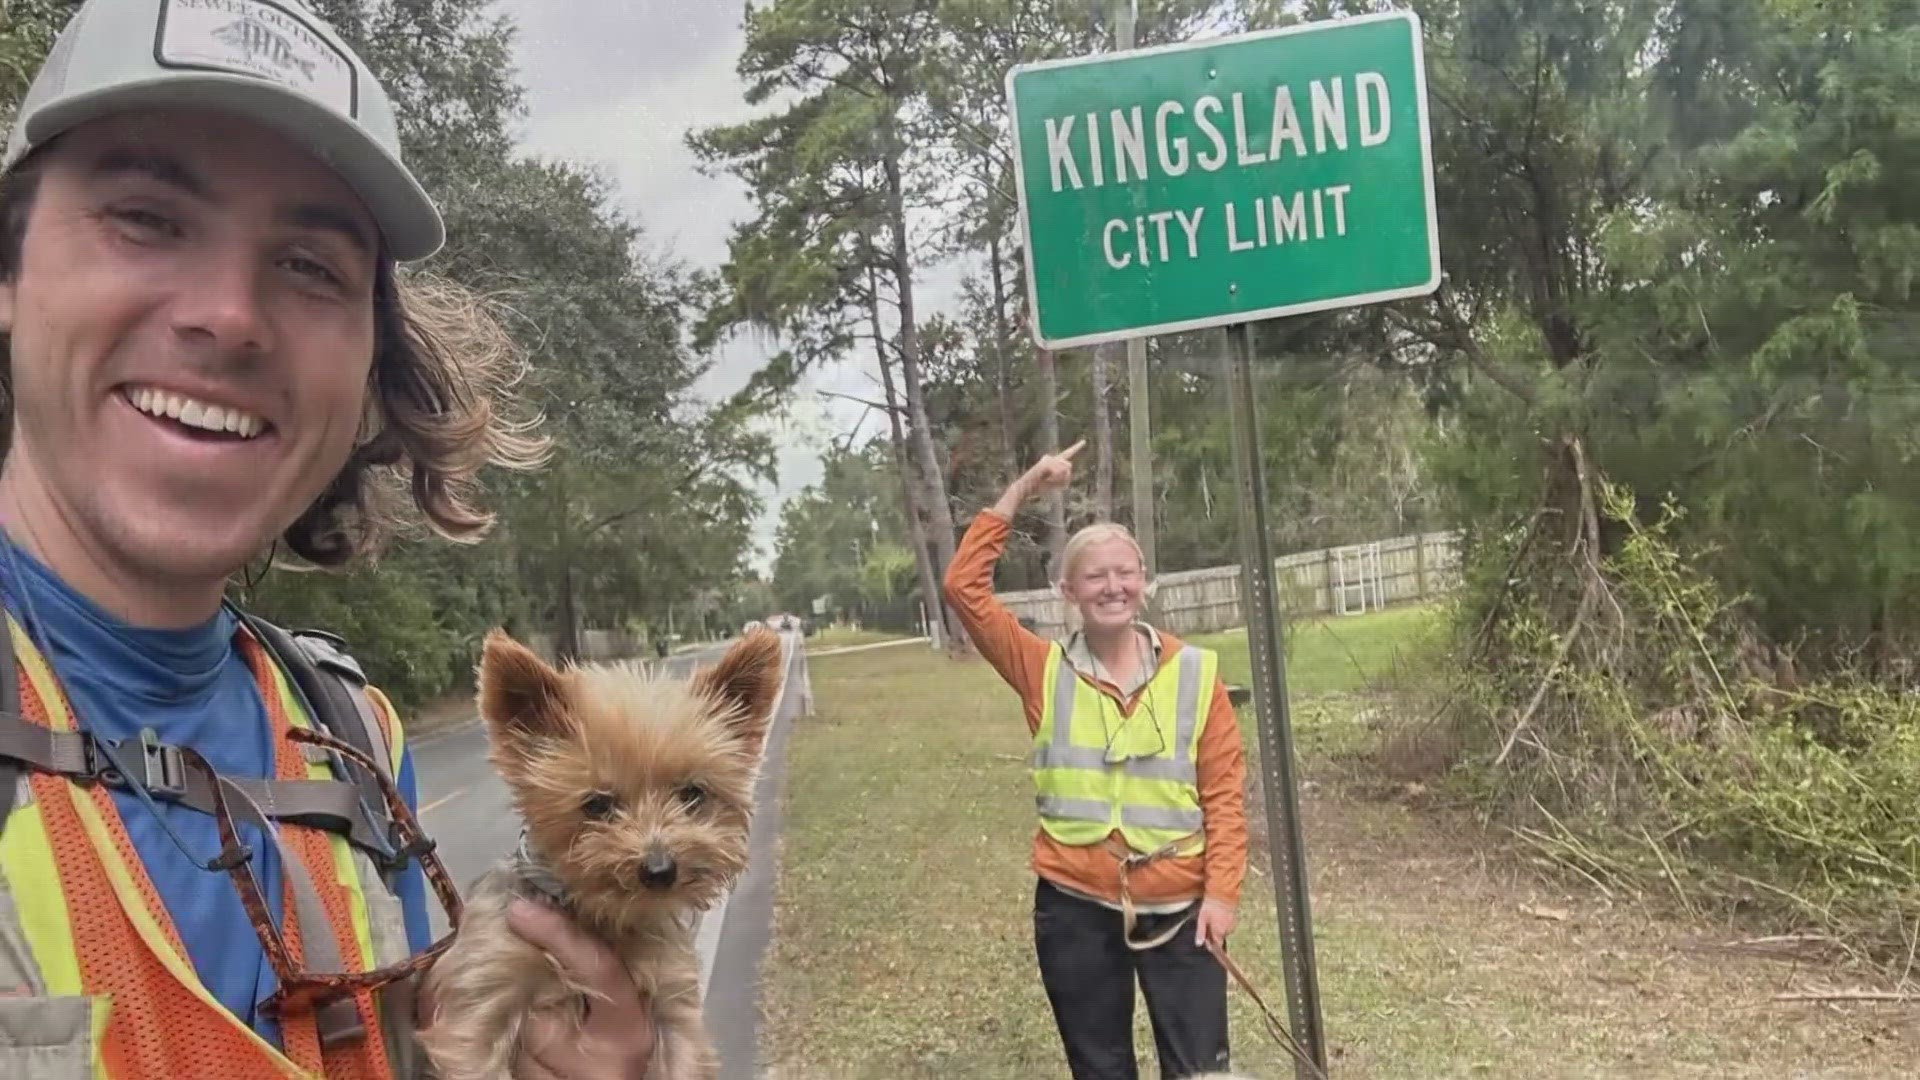 Matt and Grace Grooms set out on a mission to raise $100,000 for kids by walking the length of the East Coast Greenway from Maine to Key West.